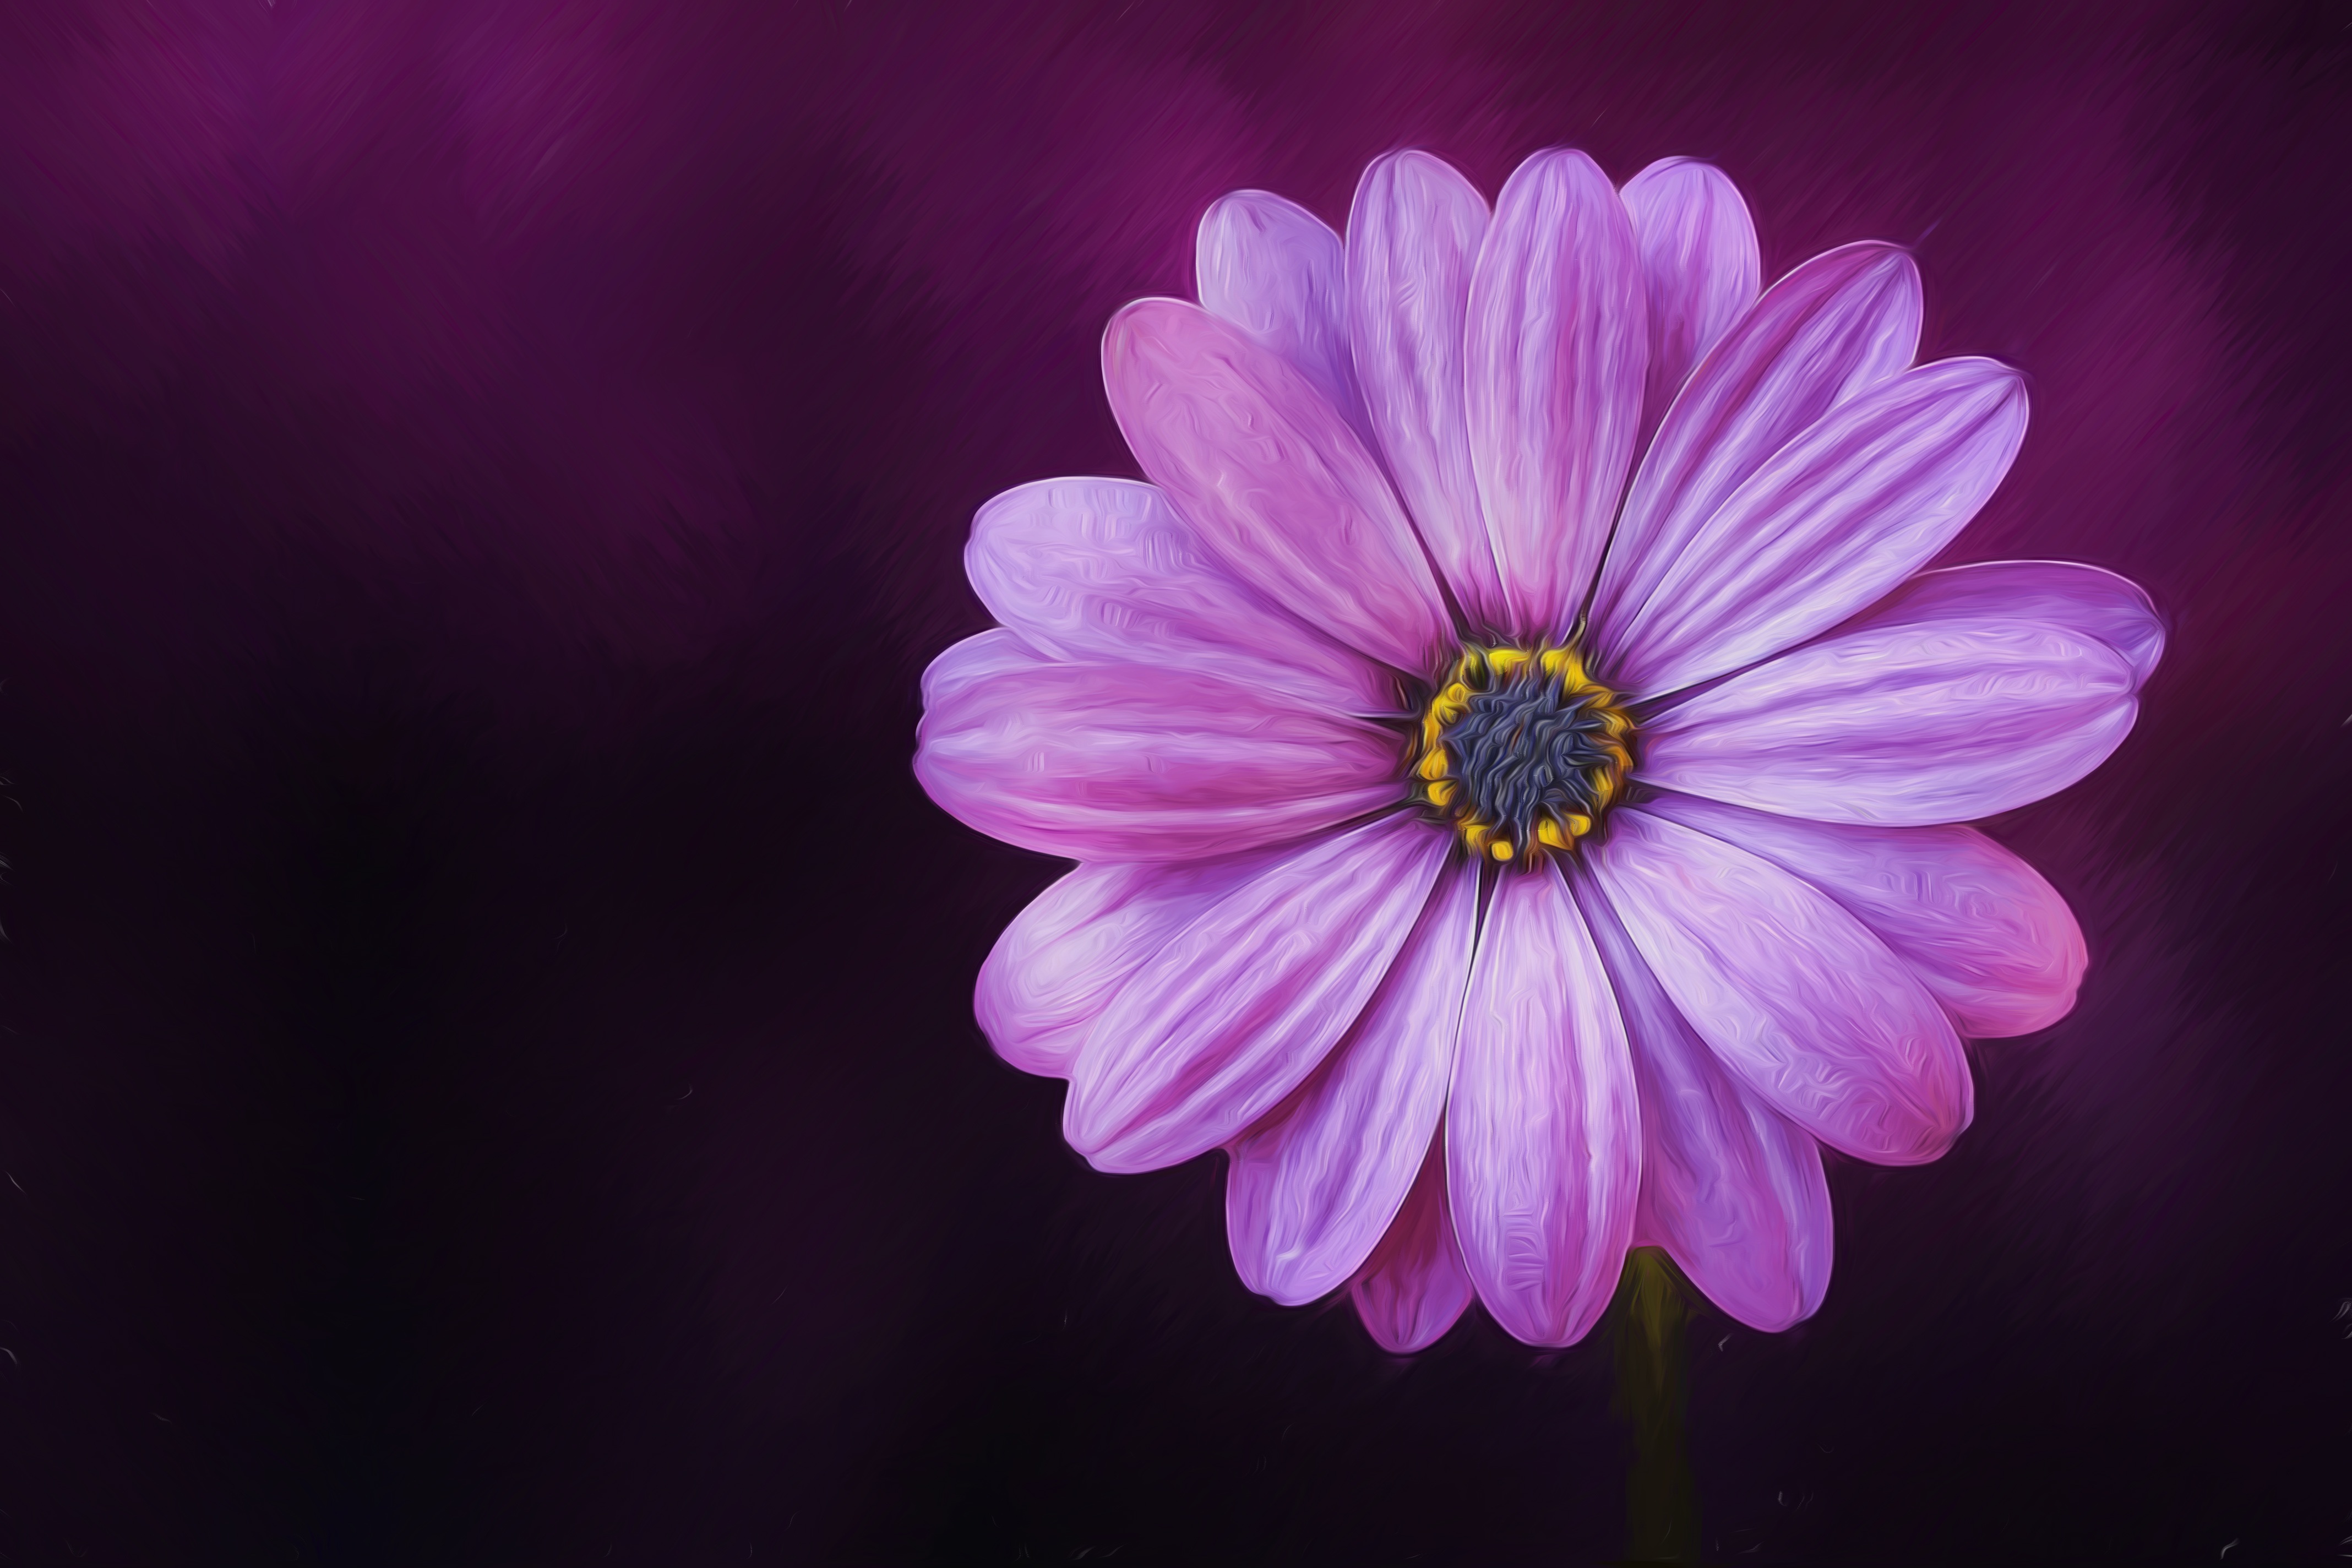 African Daisy done with an oil paint filter by Hans Benn